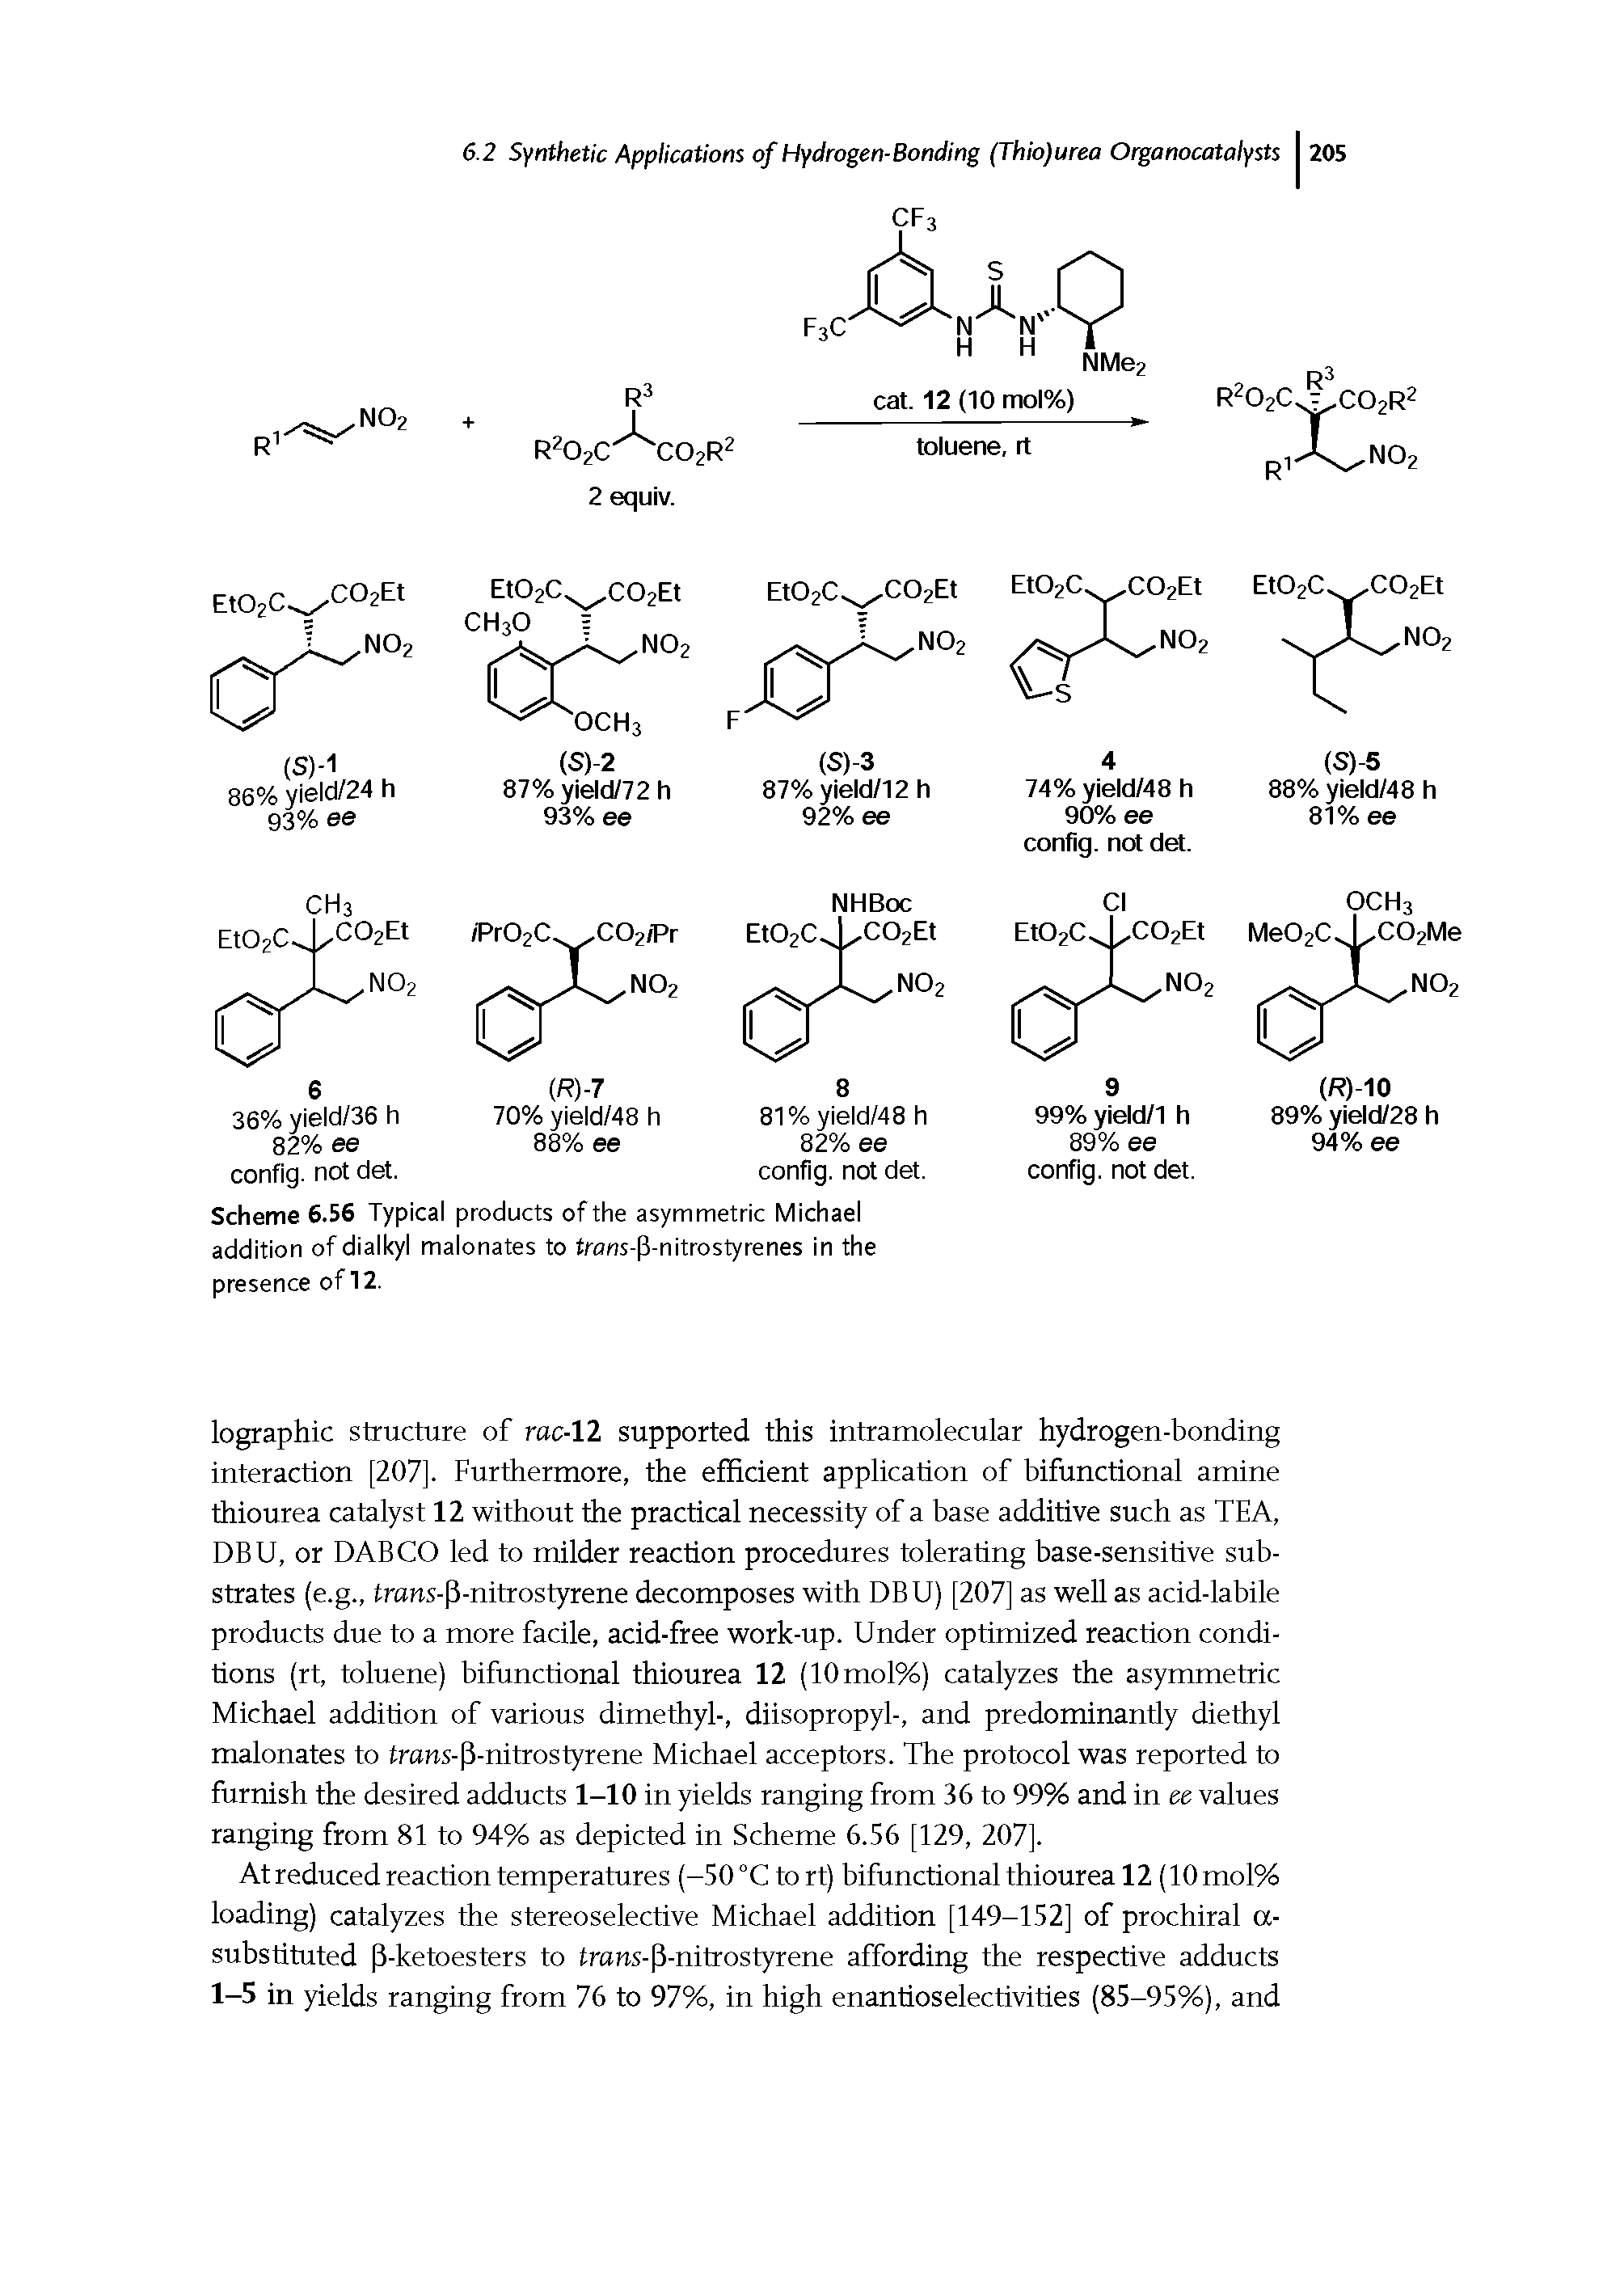 Scheme 6.56 Typical products of the asymmetric Michael addition of dialkyl malonates to frans-P-nitrostyrenes in the presence of 12.